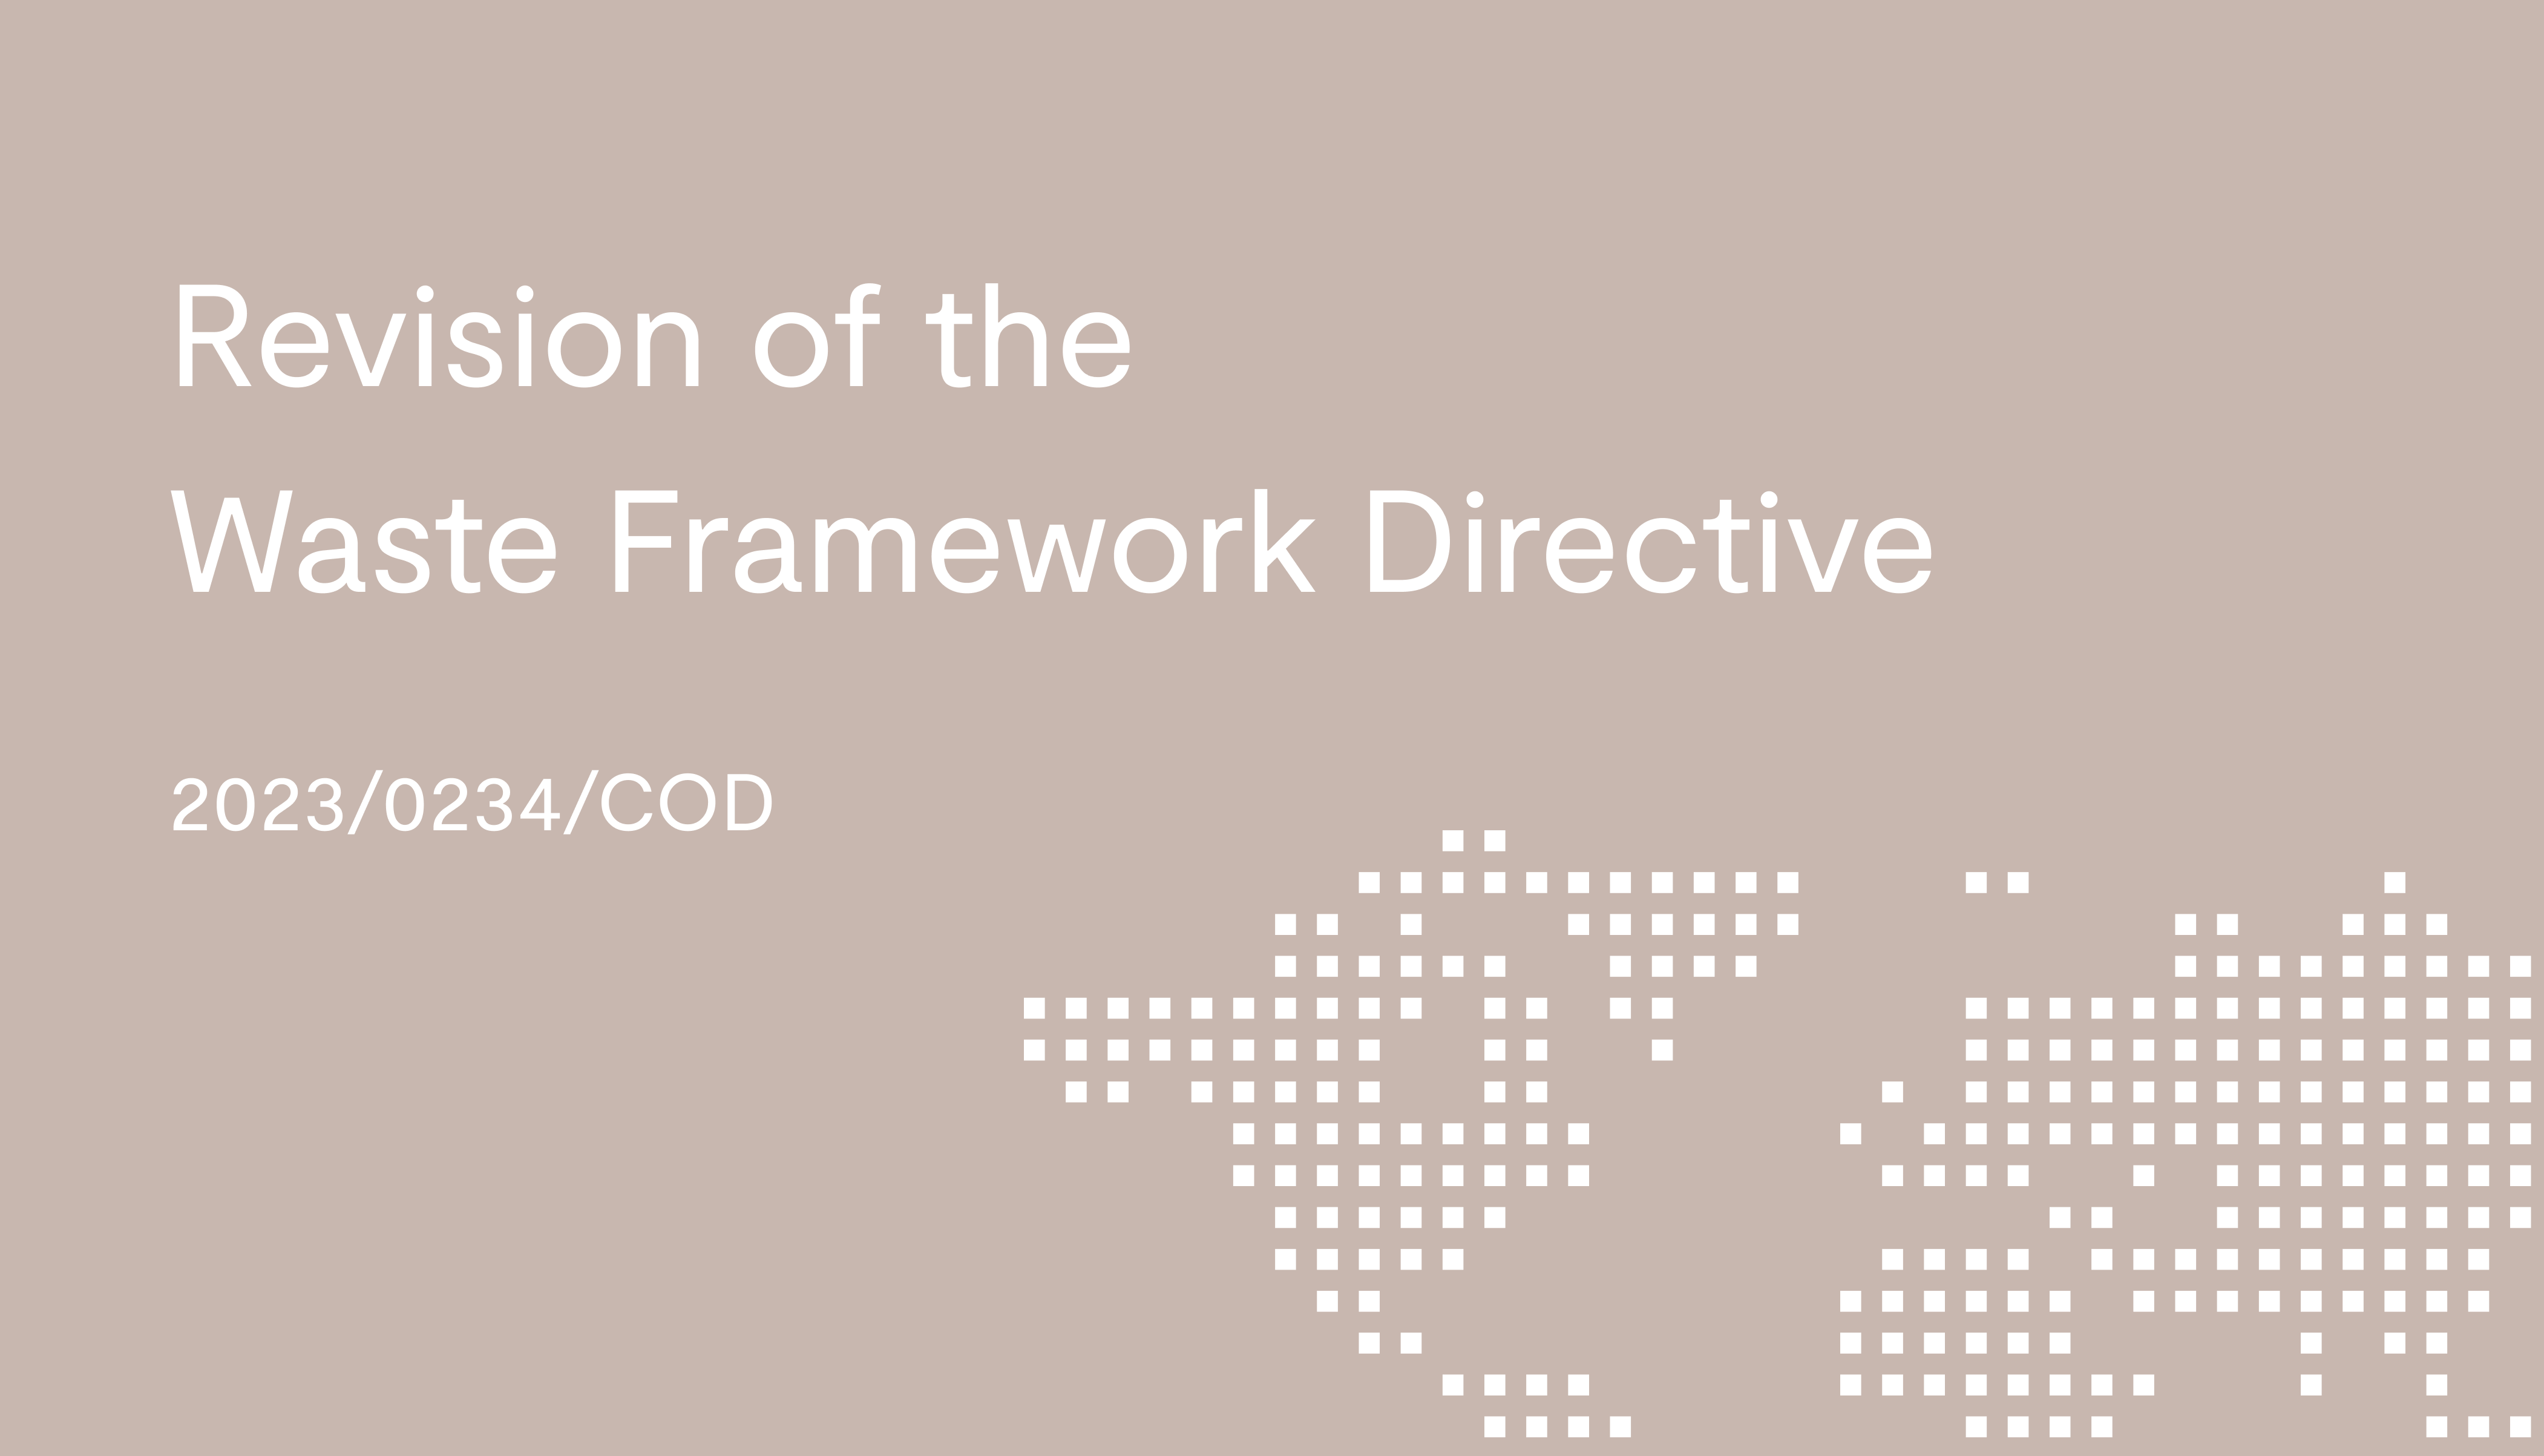 Revision of the Waste Framework Directive (2023/0234/COD)